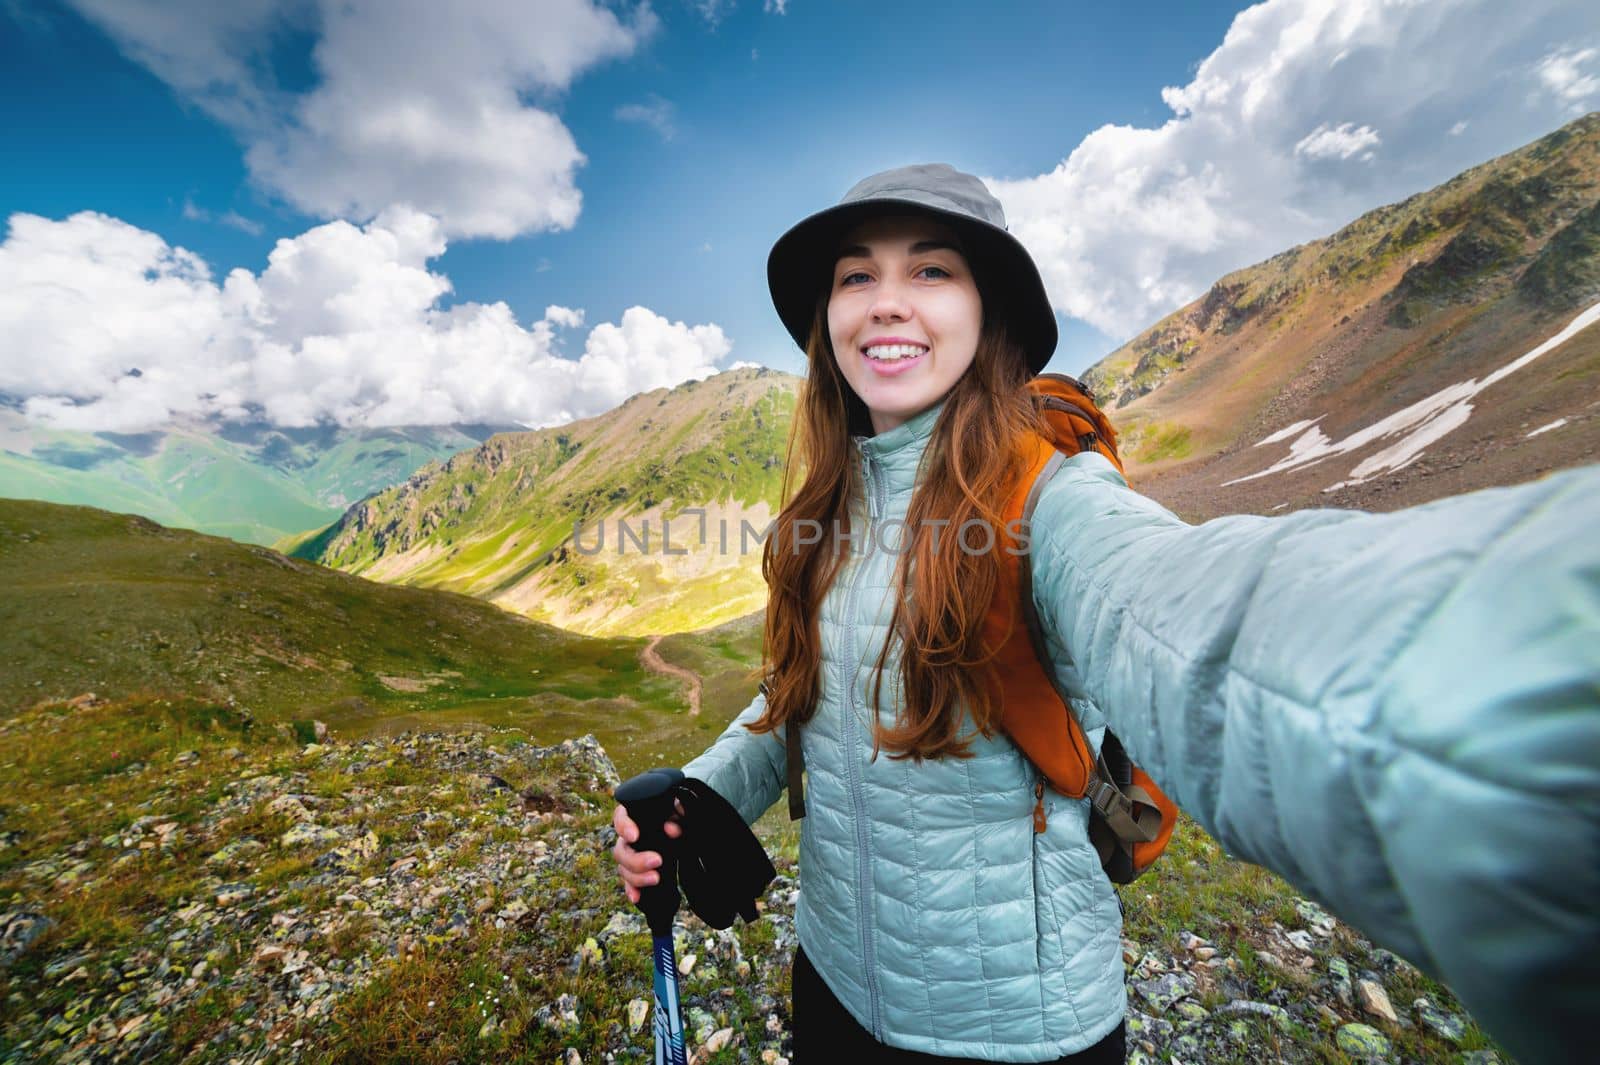 Smiling young woman takes a selfie on a mountain peak, with a backpack on a sunny day. Tourist hiking in the mountains.